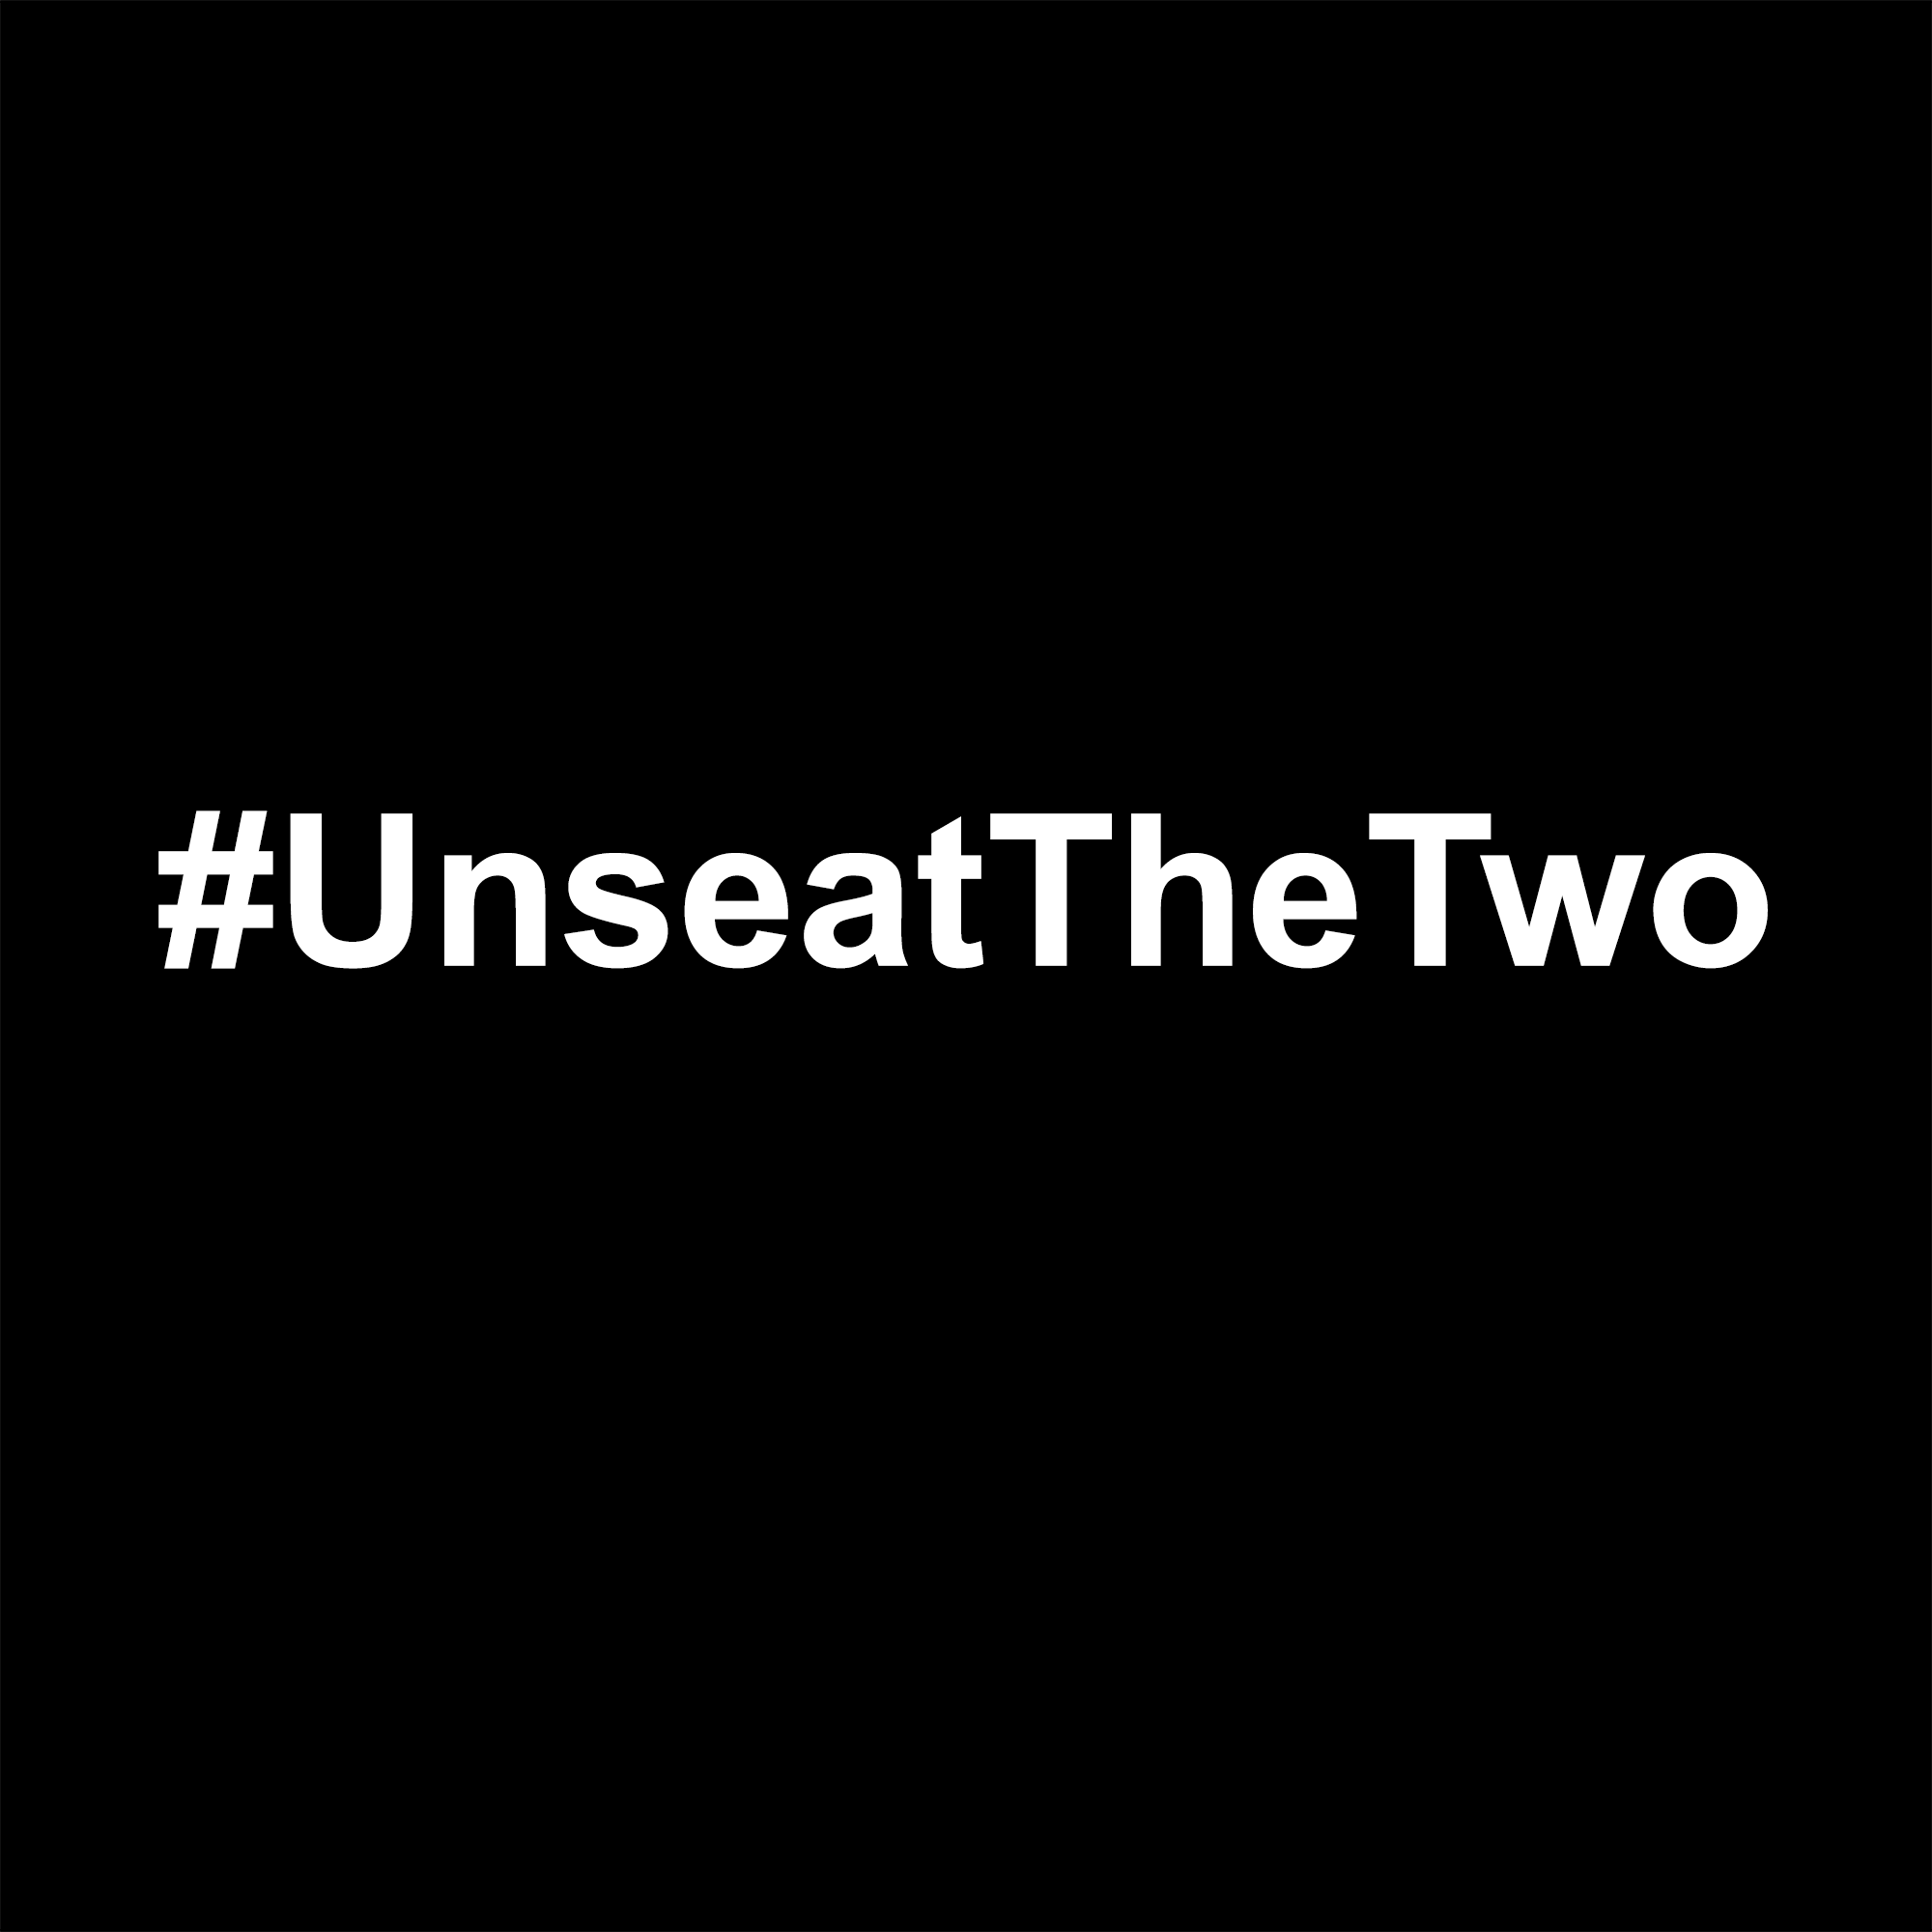 Image containing the hashtag Unseat The Two